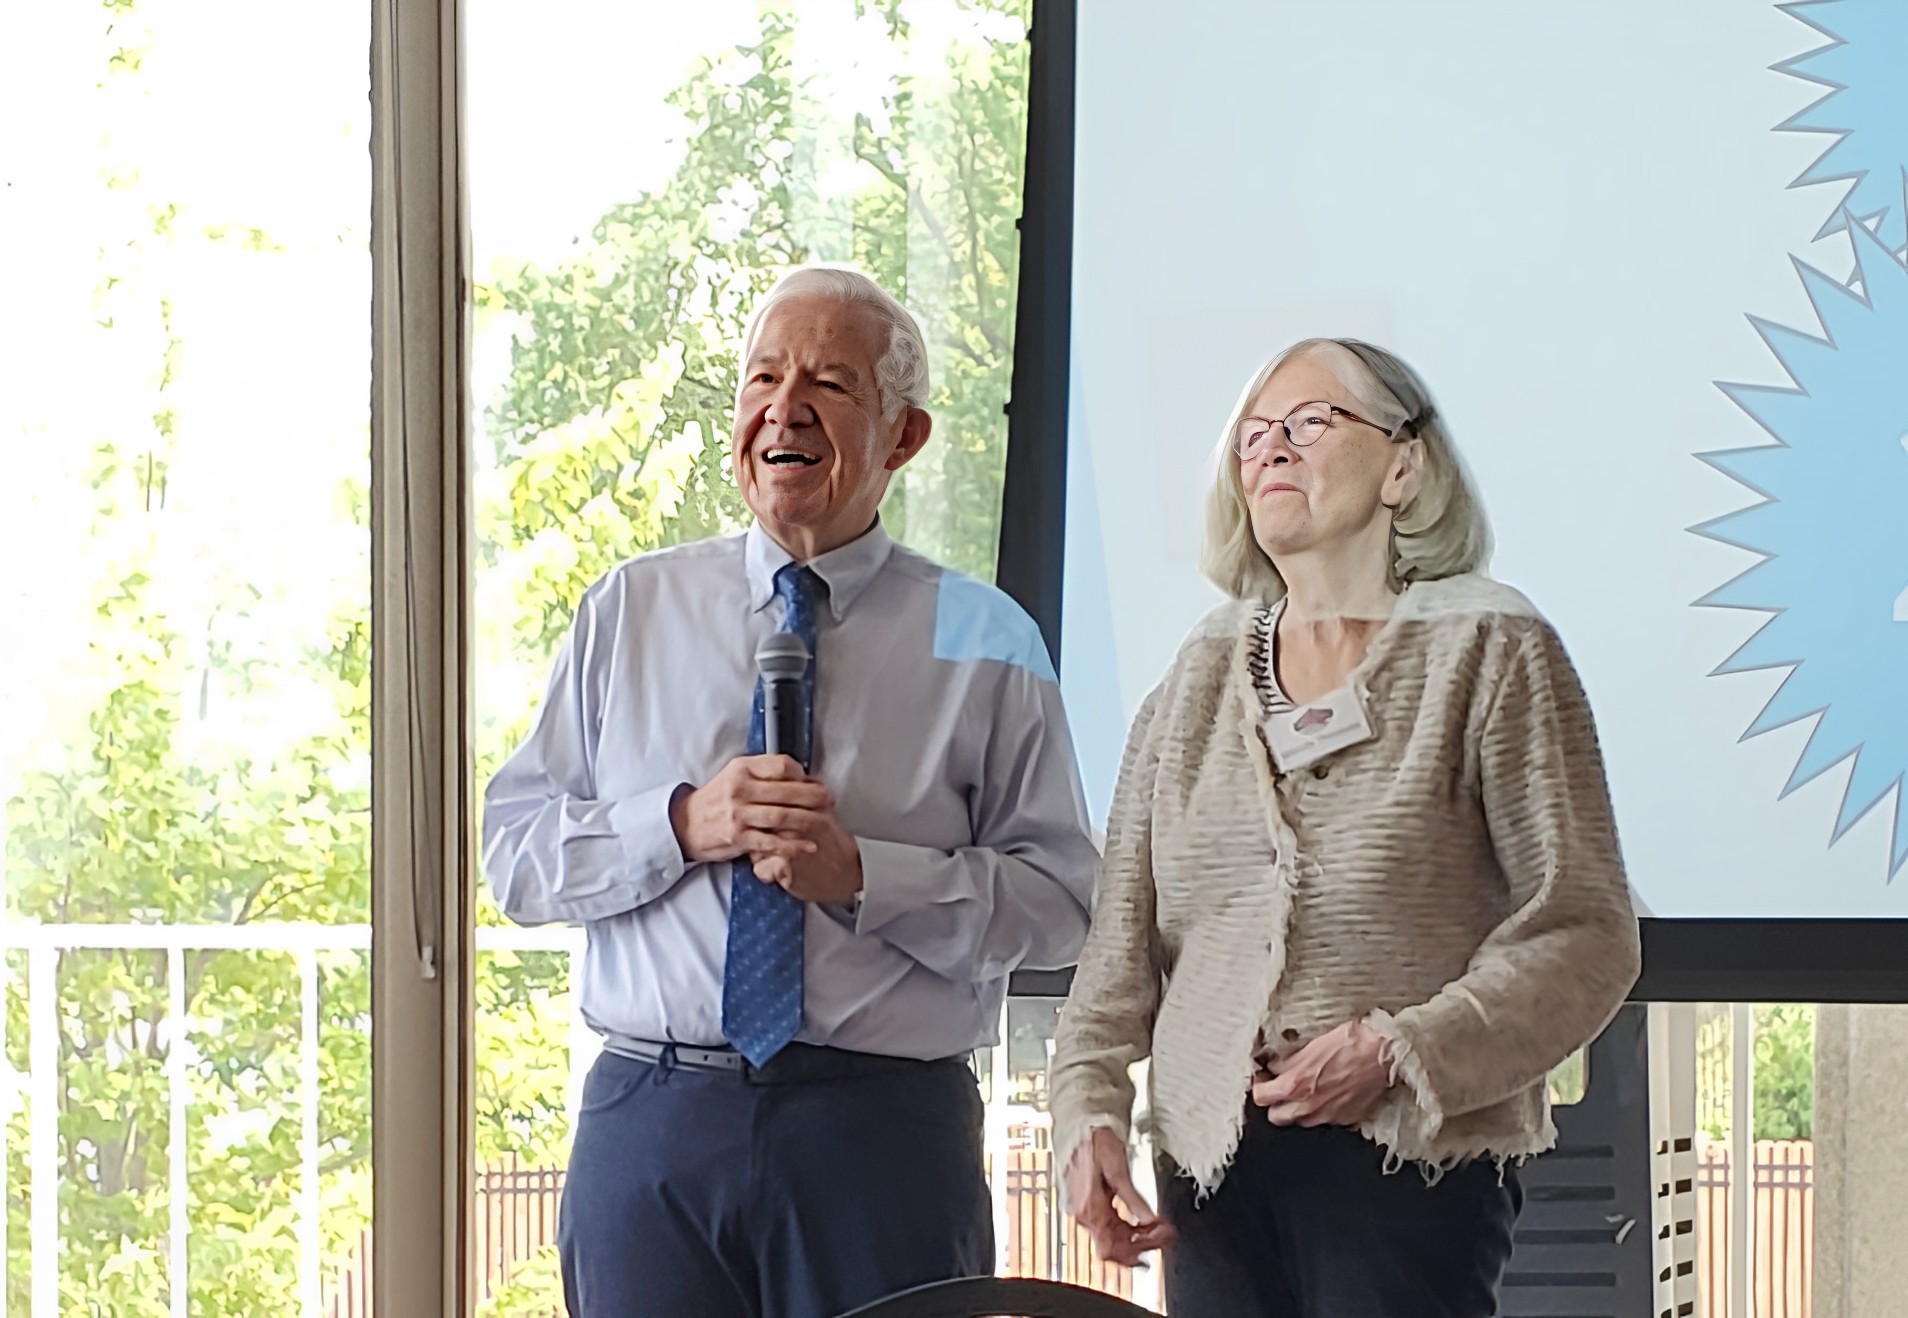 Dr. Michael Fiore honors Dr. Wendy Theobald for her contributions to help people quit smoking at UW-CTRI. 